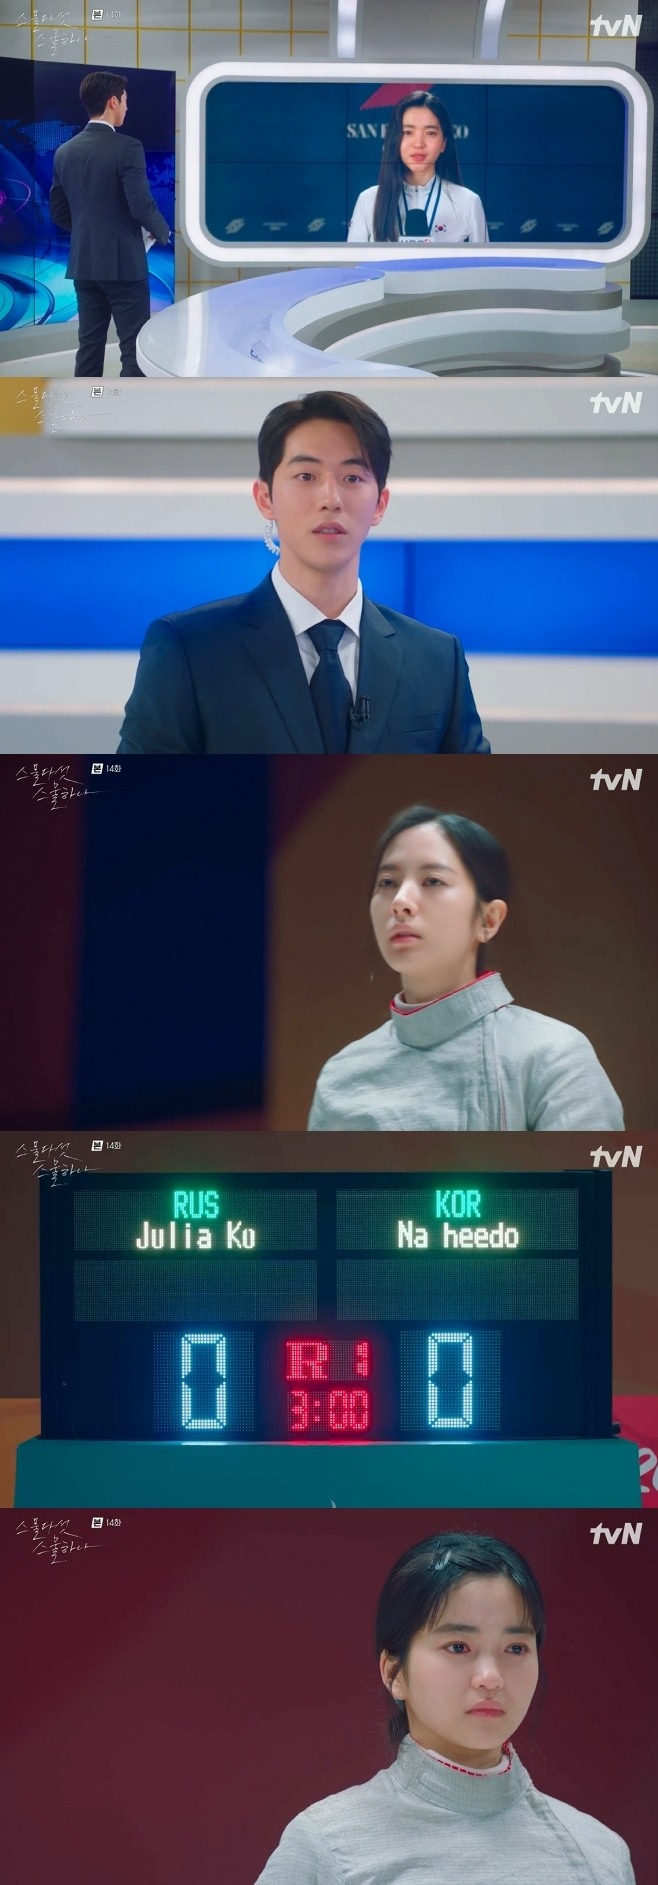 In Twenty Five Twenty One, Bona was pictured as having chosen Russian naturalization.In the 14th episode of TVNs Saturday Drama Twenty Five Twinty One (playplayed by Kwon Do-eun and directed by Jung Ji-hyun), which aired on the 27th night, interviews between Na Hee-do (Kim Tae-ri), who became the worlds best fencing player, and anchor Baek Lee Jin (Nam Joo-hyuk) were released in 2009.Na Hee-dos daughter (Choi Myung-bin), who was wondering about the relationship between Na Hee-do and Baek Lee Jin, looked up the video of Na Hee-do - A special relationship of a back Jin anchor uploaded in 2009.Na Hee-do, who is connected to the back Lee Jin by burn, said, How was the anchor?And Lee Jin introduced me asNa Hee-do was my only player when I was a sportsman. I won gold medals for three consecutive times in San Francisco following Madrid and Prague, and what was this Kyonggi? And Na Hee-do said, Well.All of Kyonggi is difficult, but this was the easiest because I had a lot of hard Kyonggi. Then what was the most difficult Kyonggi? I asked, I can not forget Madrid, who gave me my first gold medal.Its the final that I played with the late Yu Rim player, he recalled.In the recall god, Yu Rim was naturalized and attracted attention because he was working as a member of Russia in the name of Julia Go.